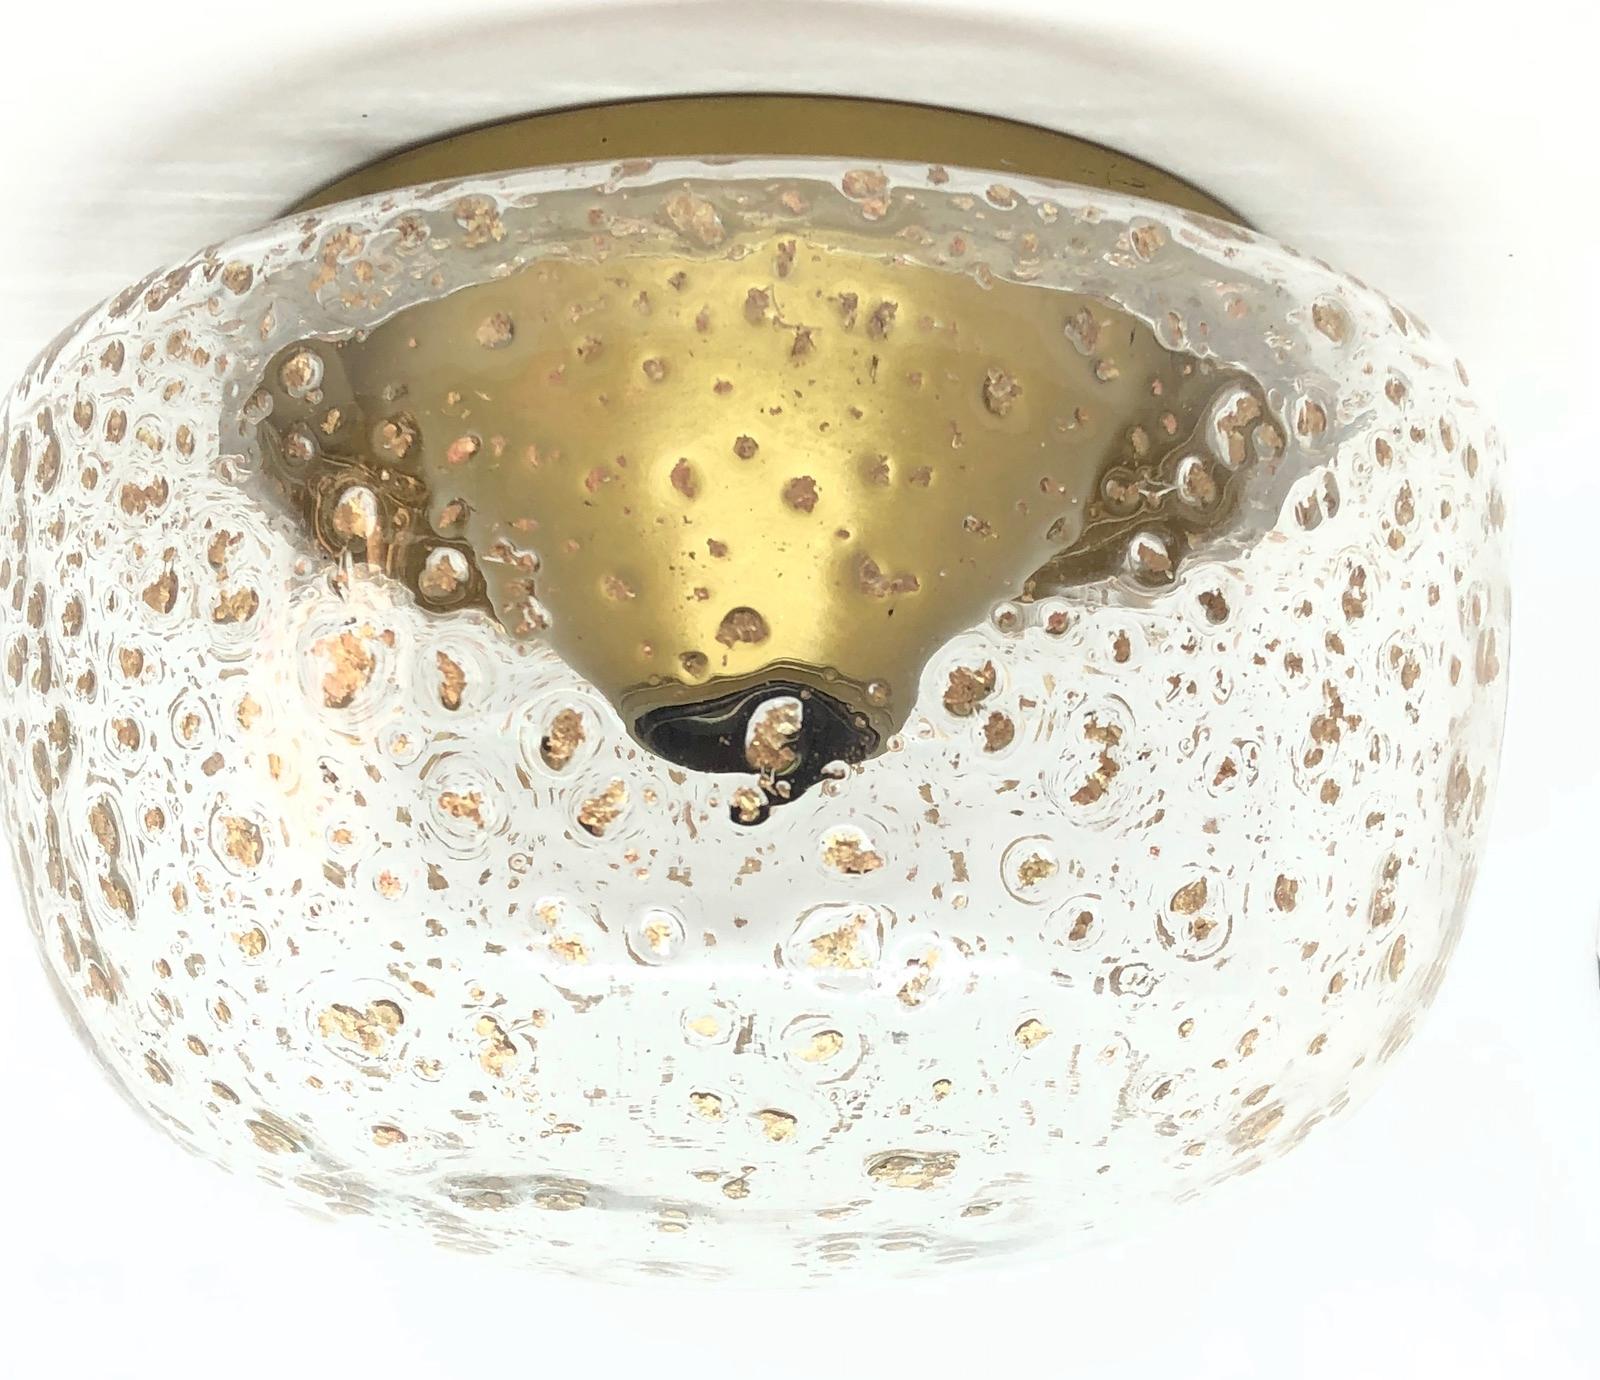 Beautiful bubble and golden flake flush mount. Made in Germany by Glashuette Limburg. Gorgeous textured glass flush mount with metal fixture. The fixture requires one European E27 Edison bulb up to 100 watts.